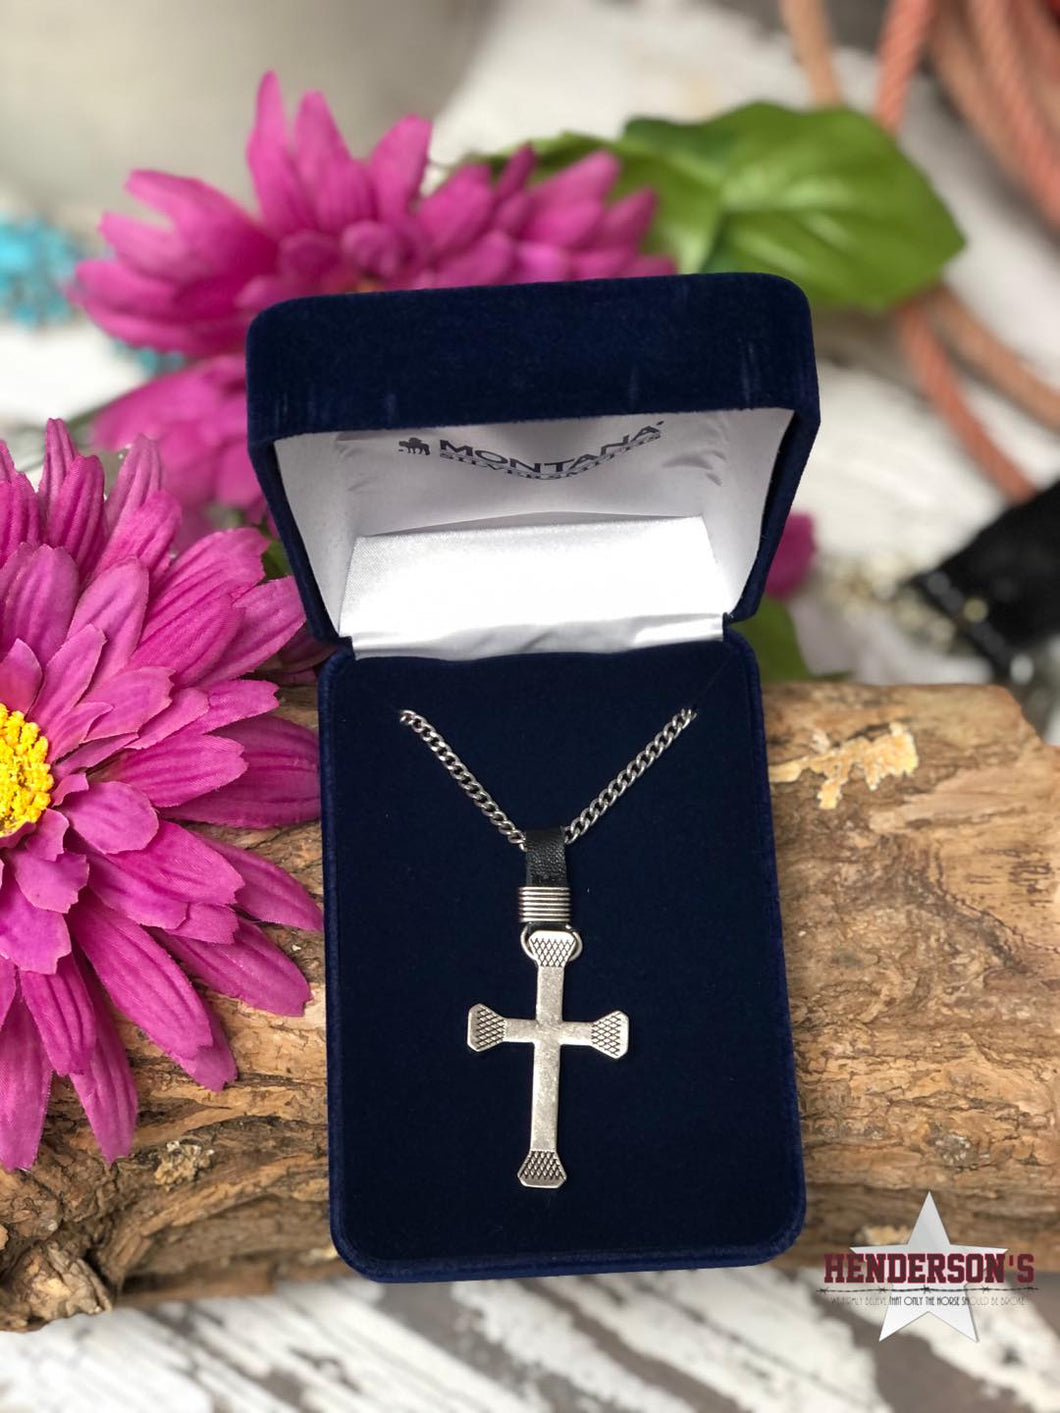 Rugged Cross Necklace - Henderson's Western Store